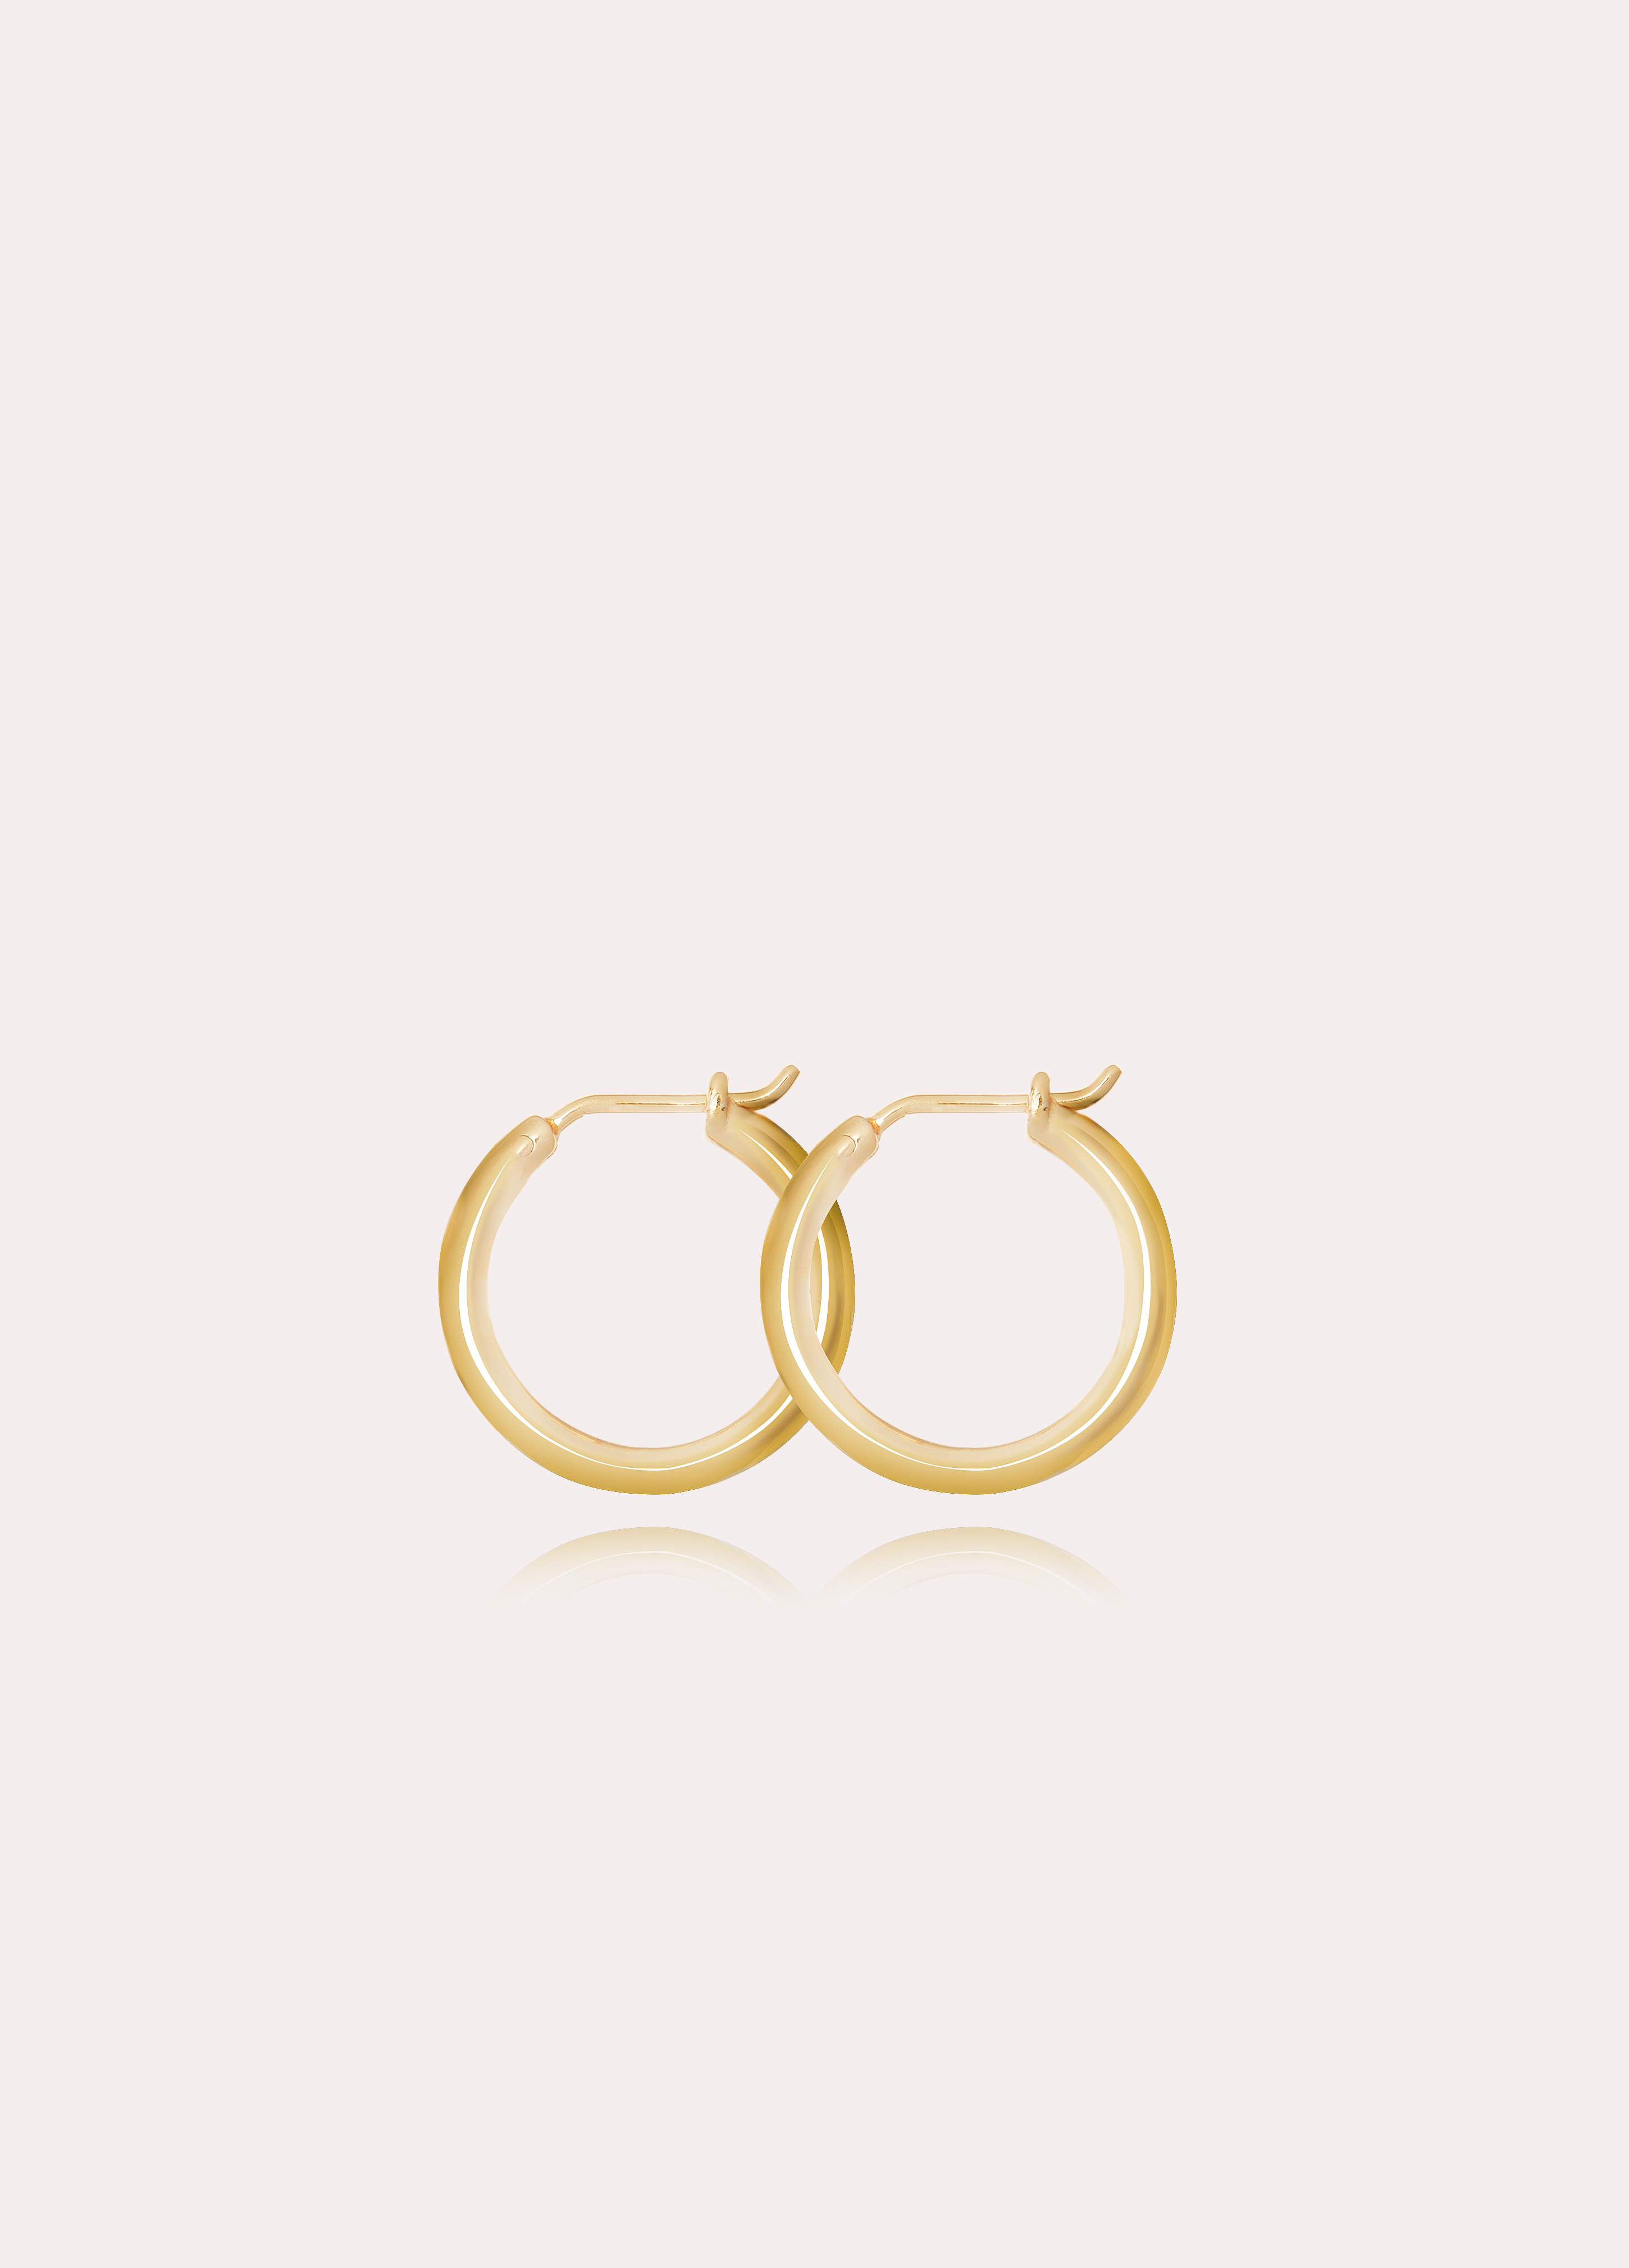 Mindy Gold Hoops